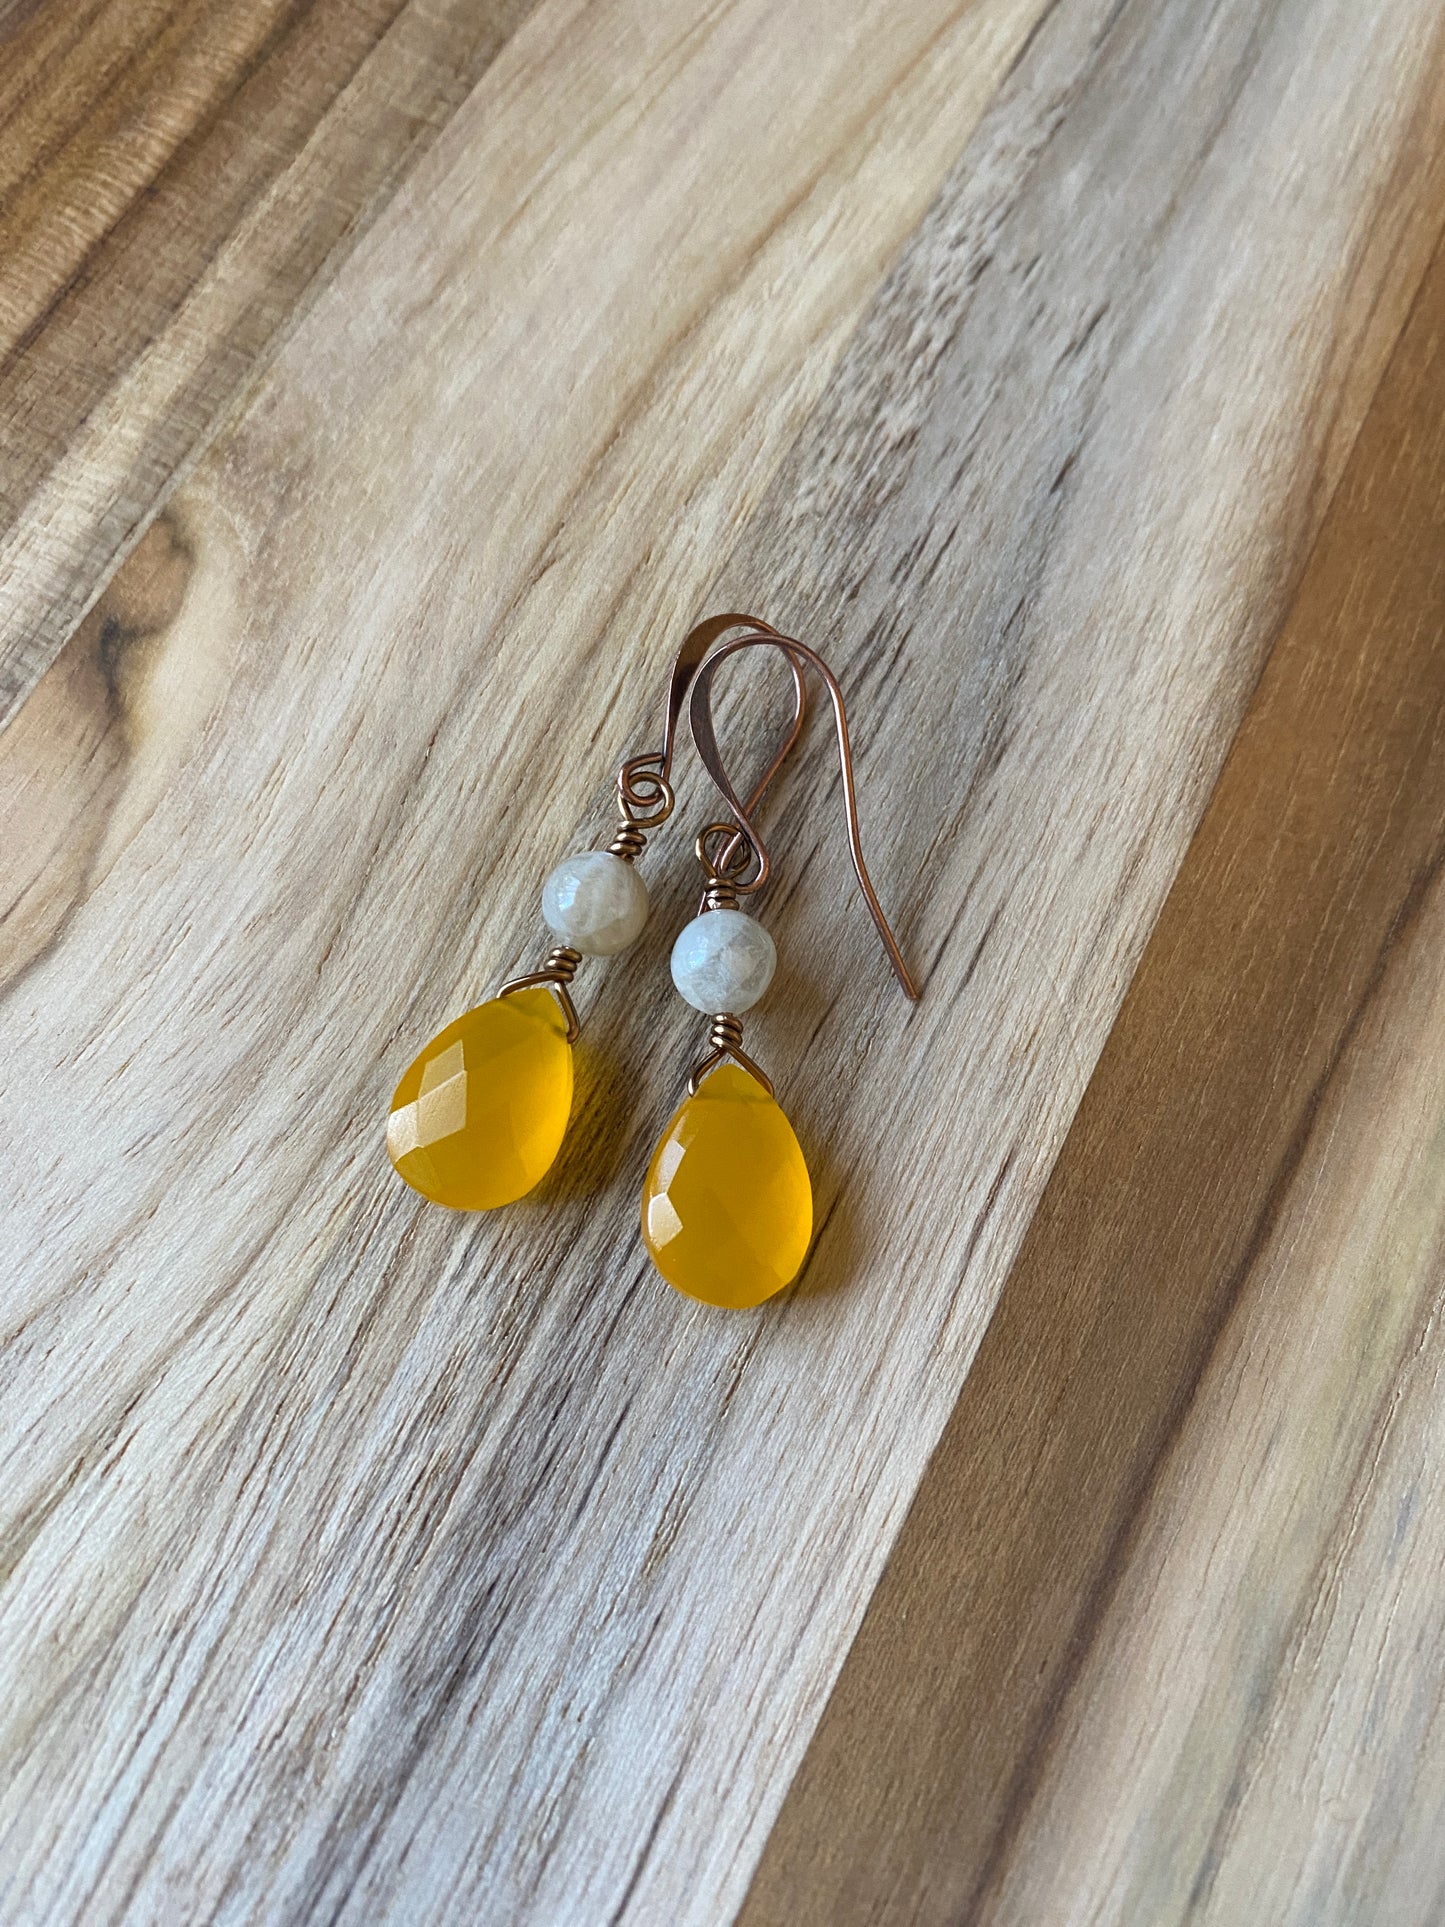 Mango Yellow Onyx with Moonstone Beads in Copper